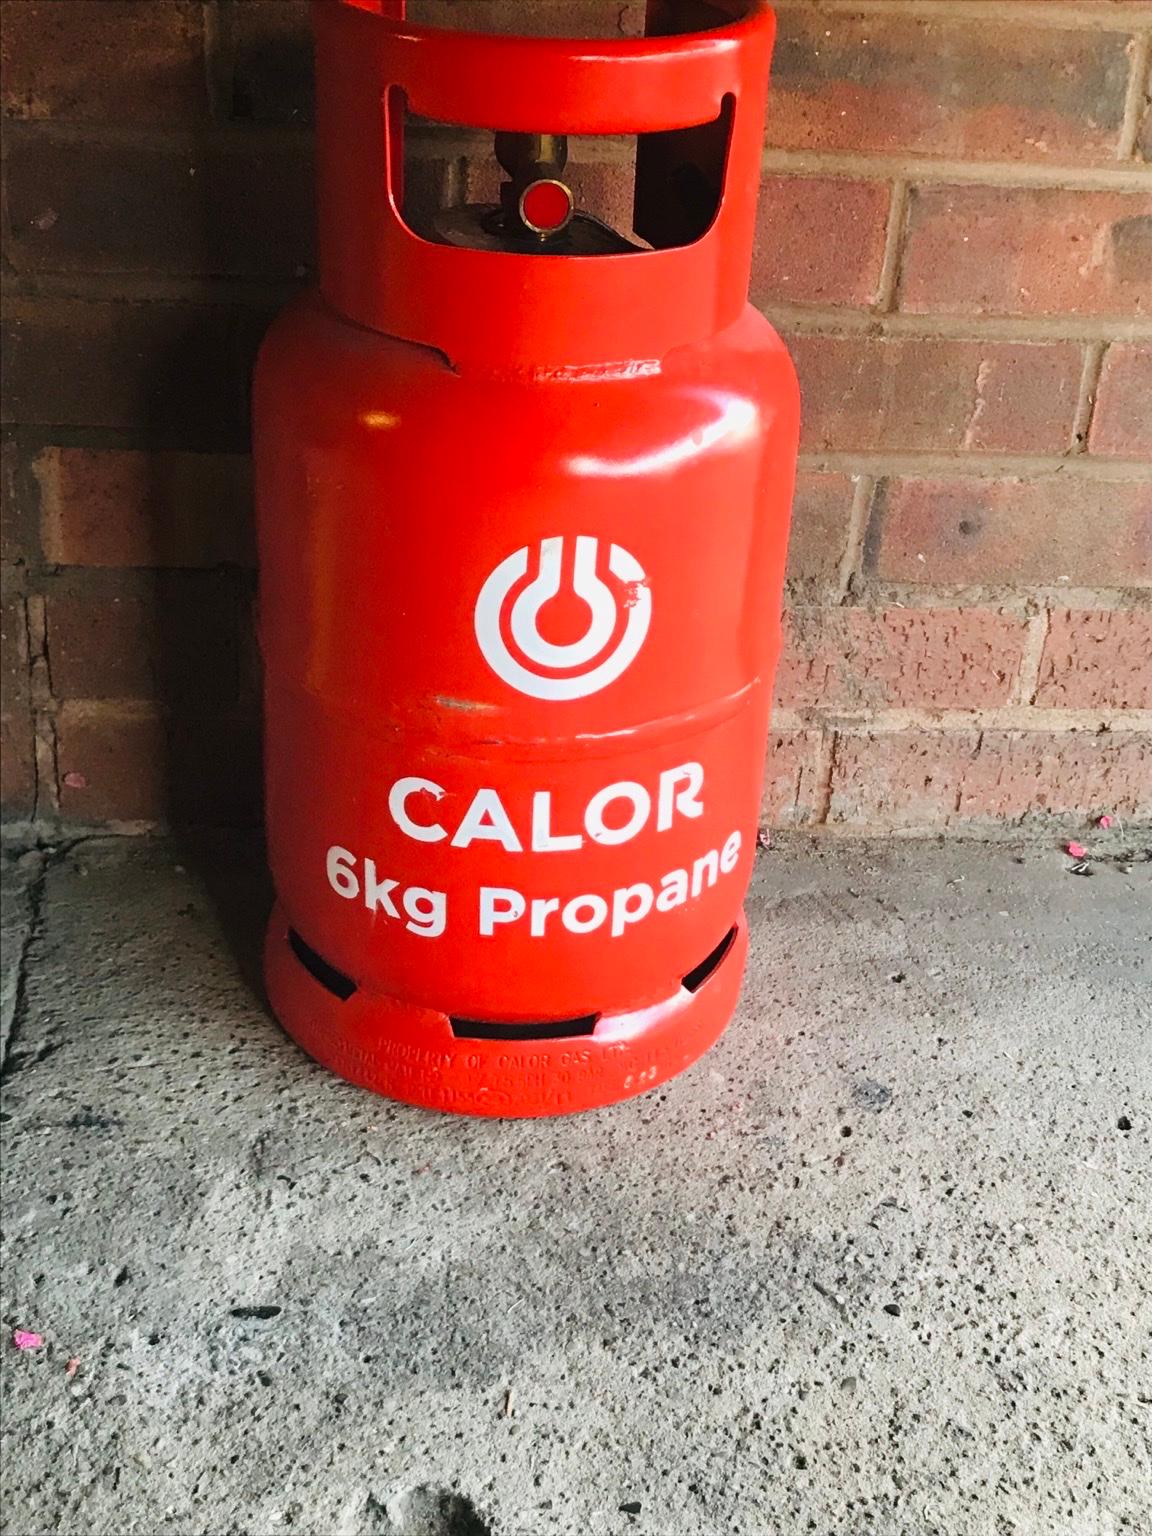 Full 6kg Propane In Dy5 Metropolitan Borough Of Dudley For £25 00 For